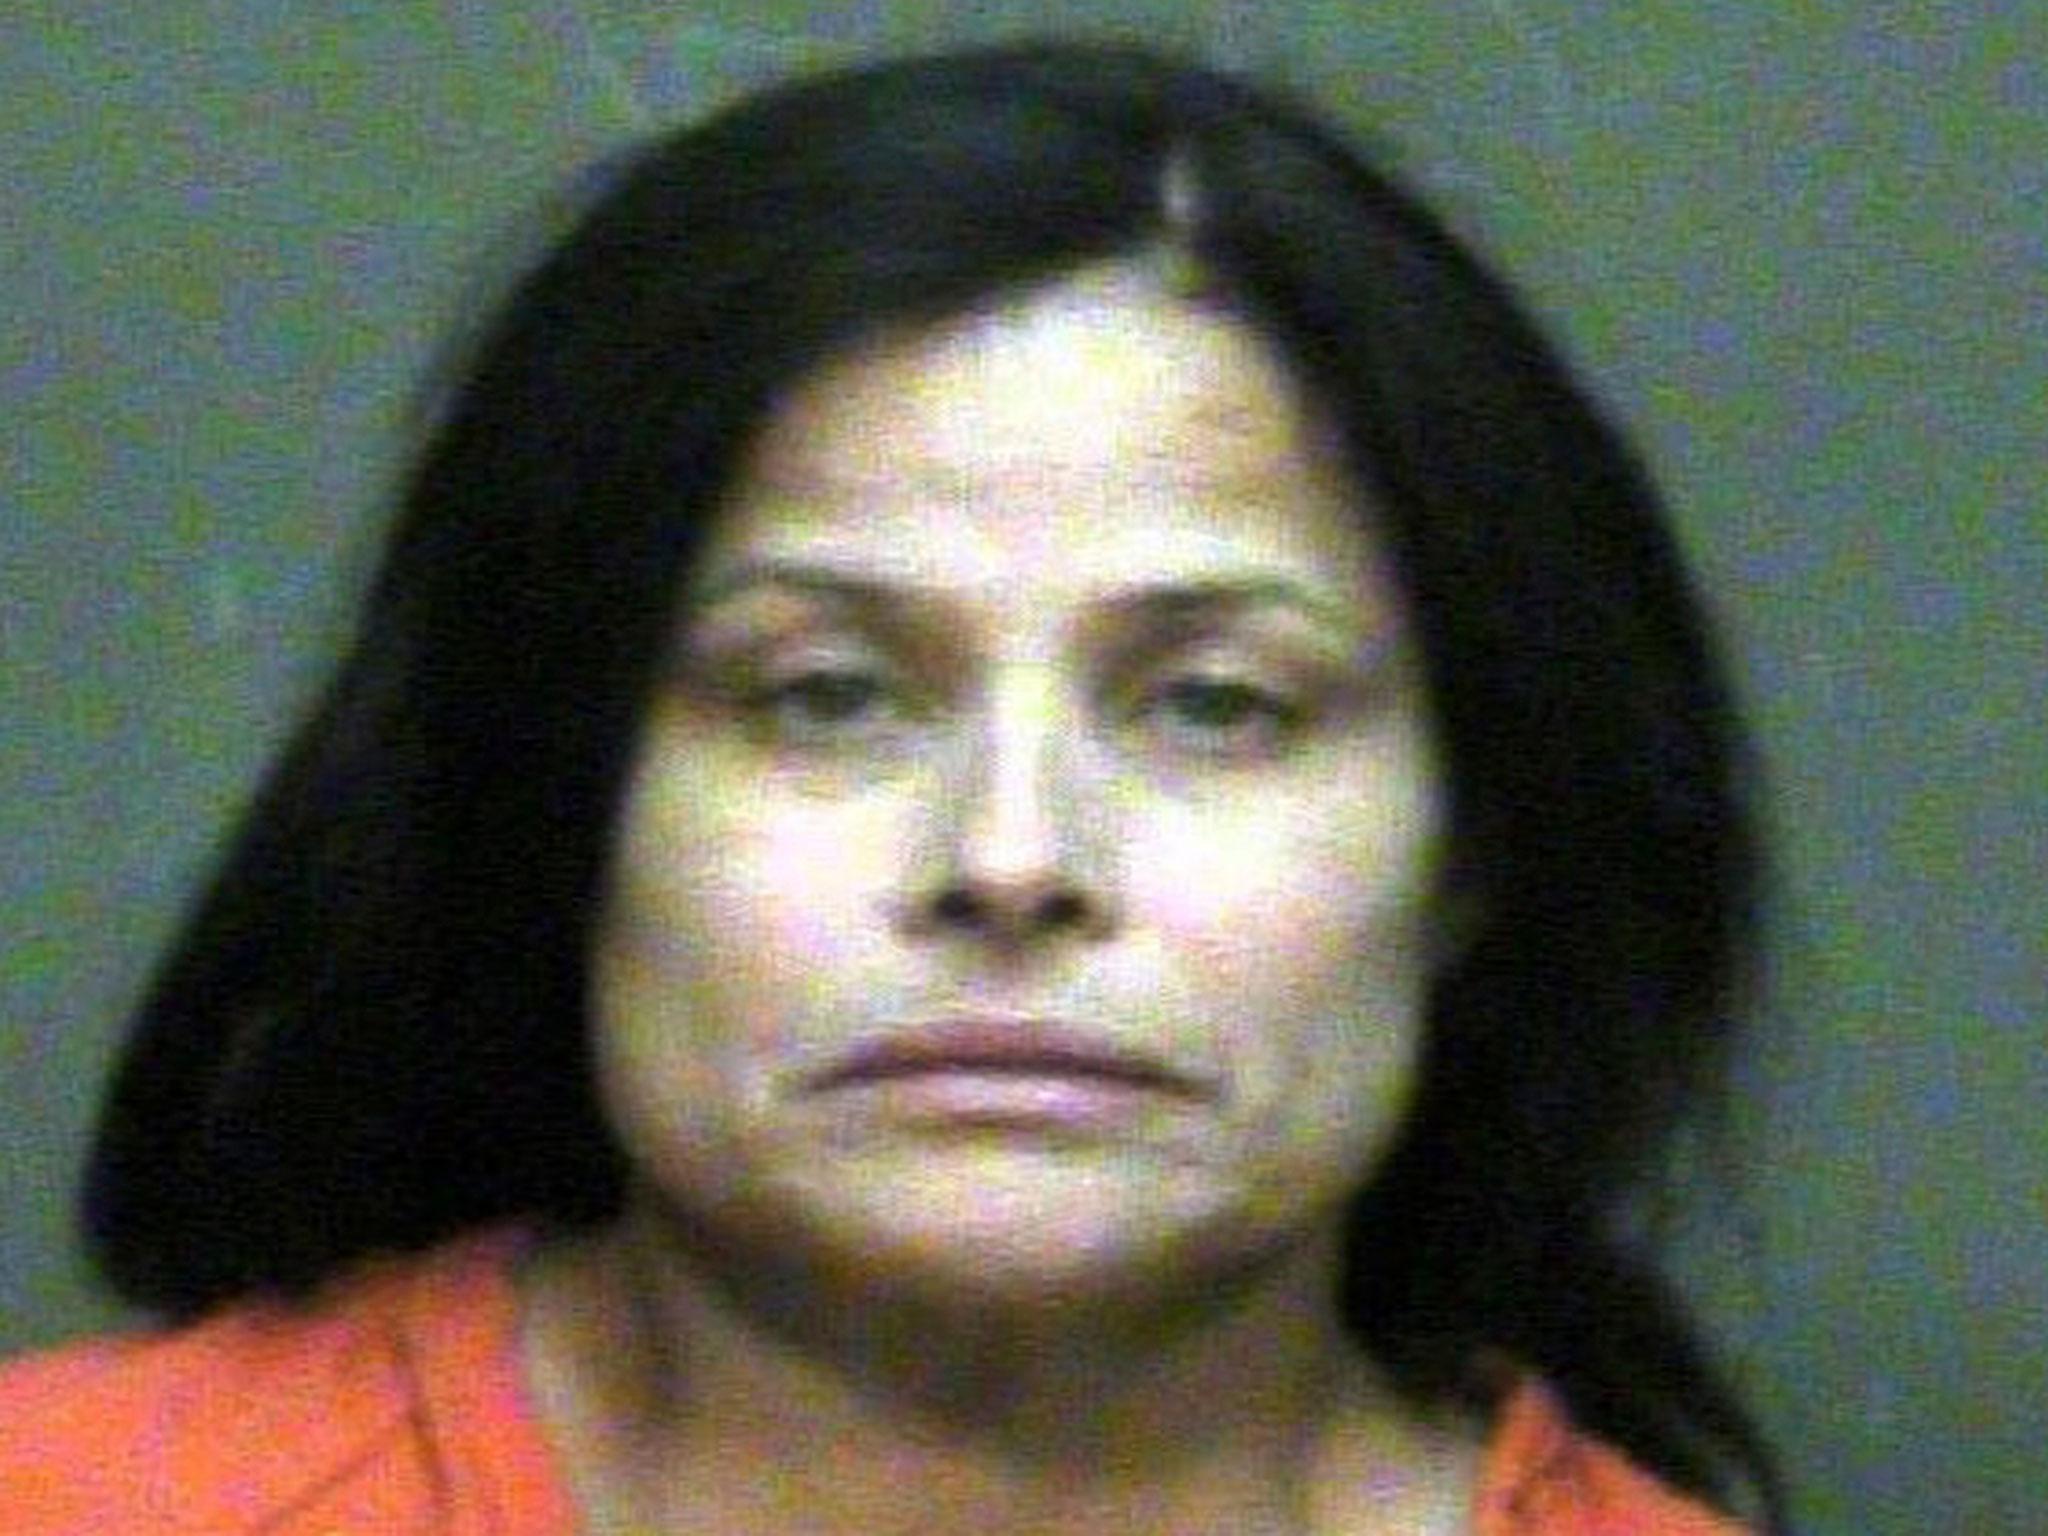 Juanita Gomez, 50, reportedly told investigators she believed her daughter was possessed by the devil